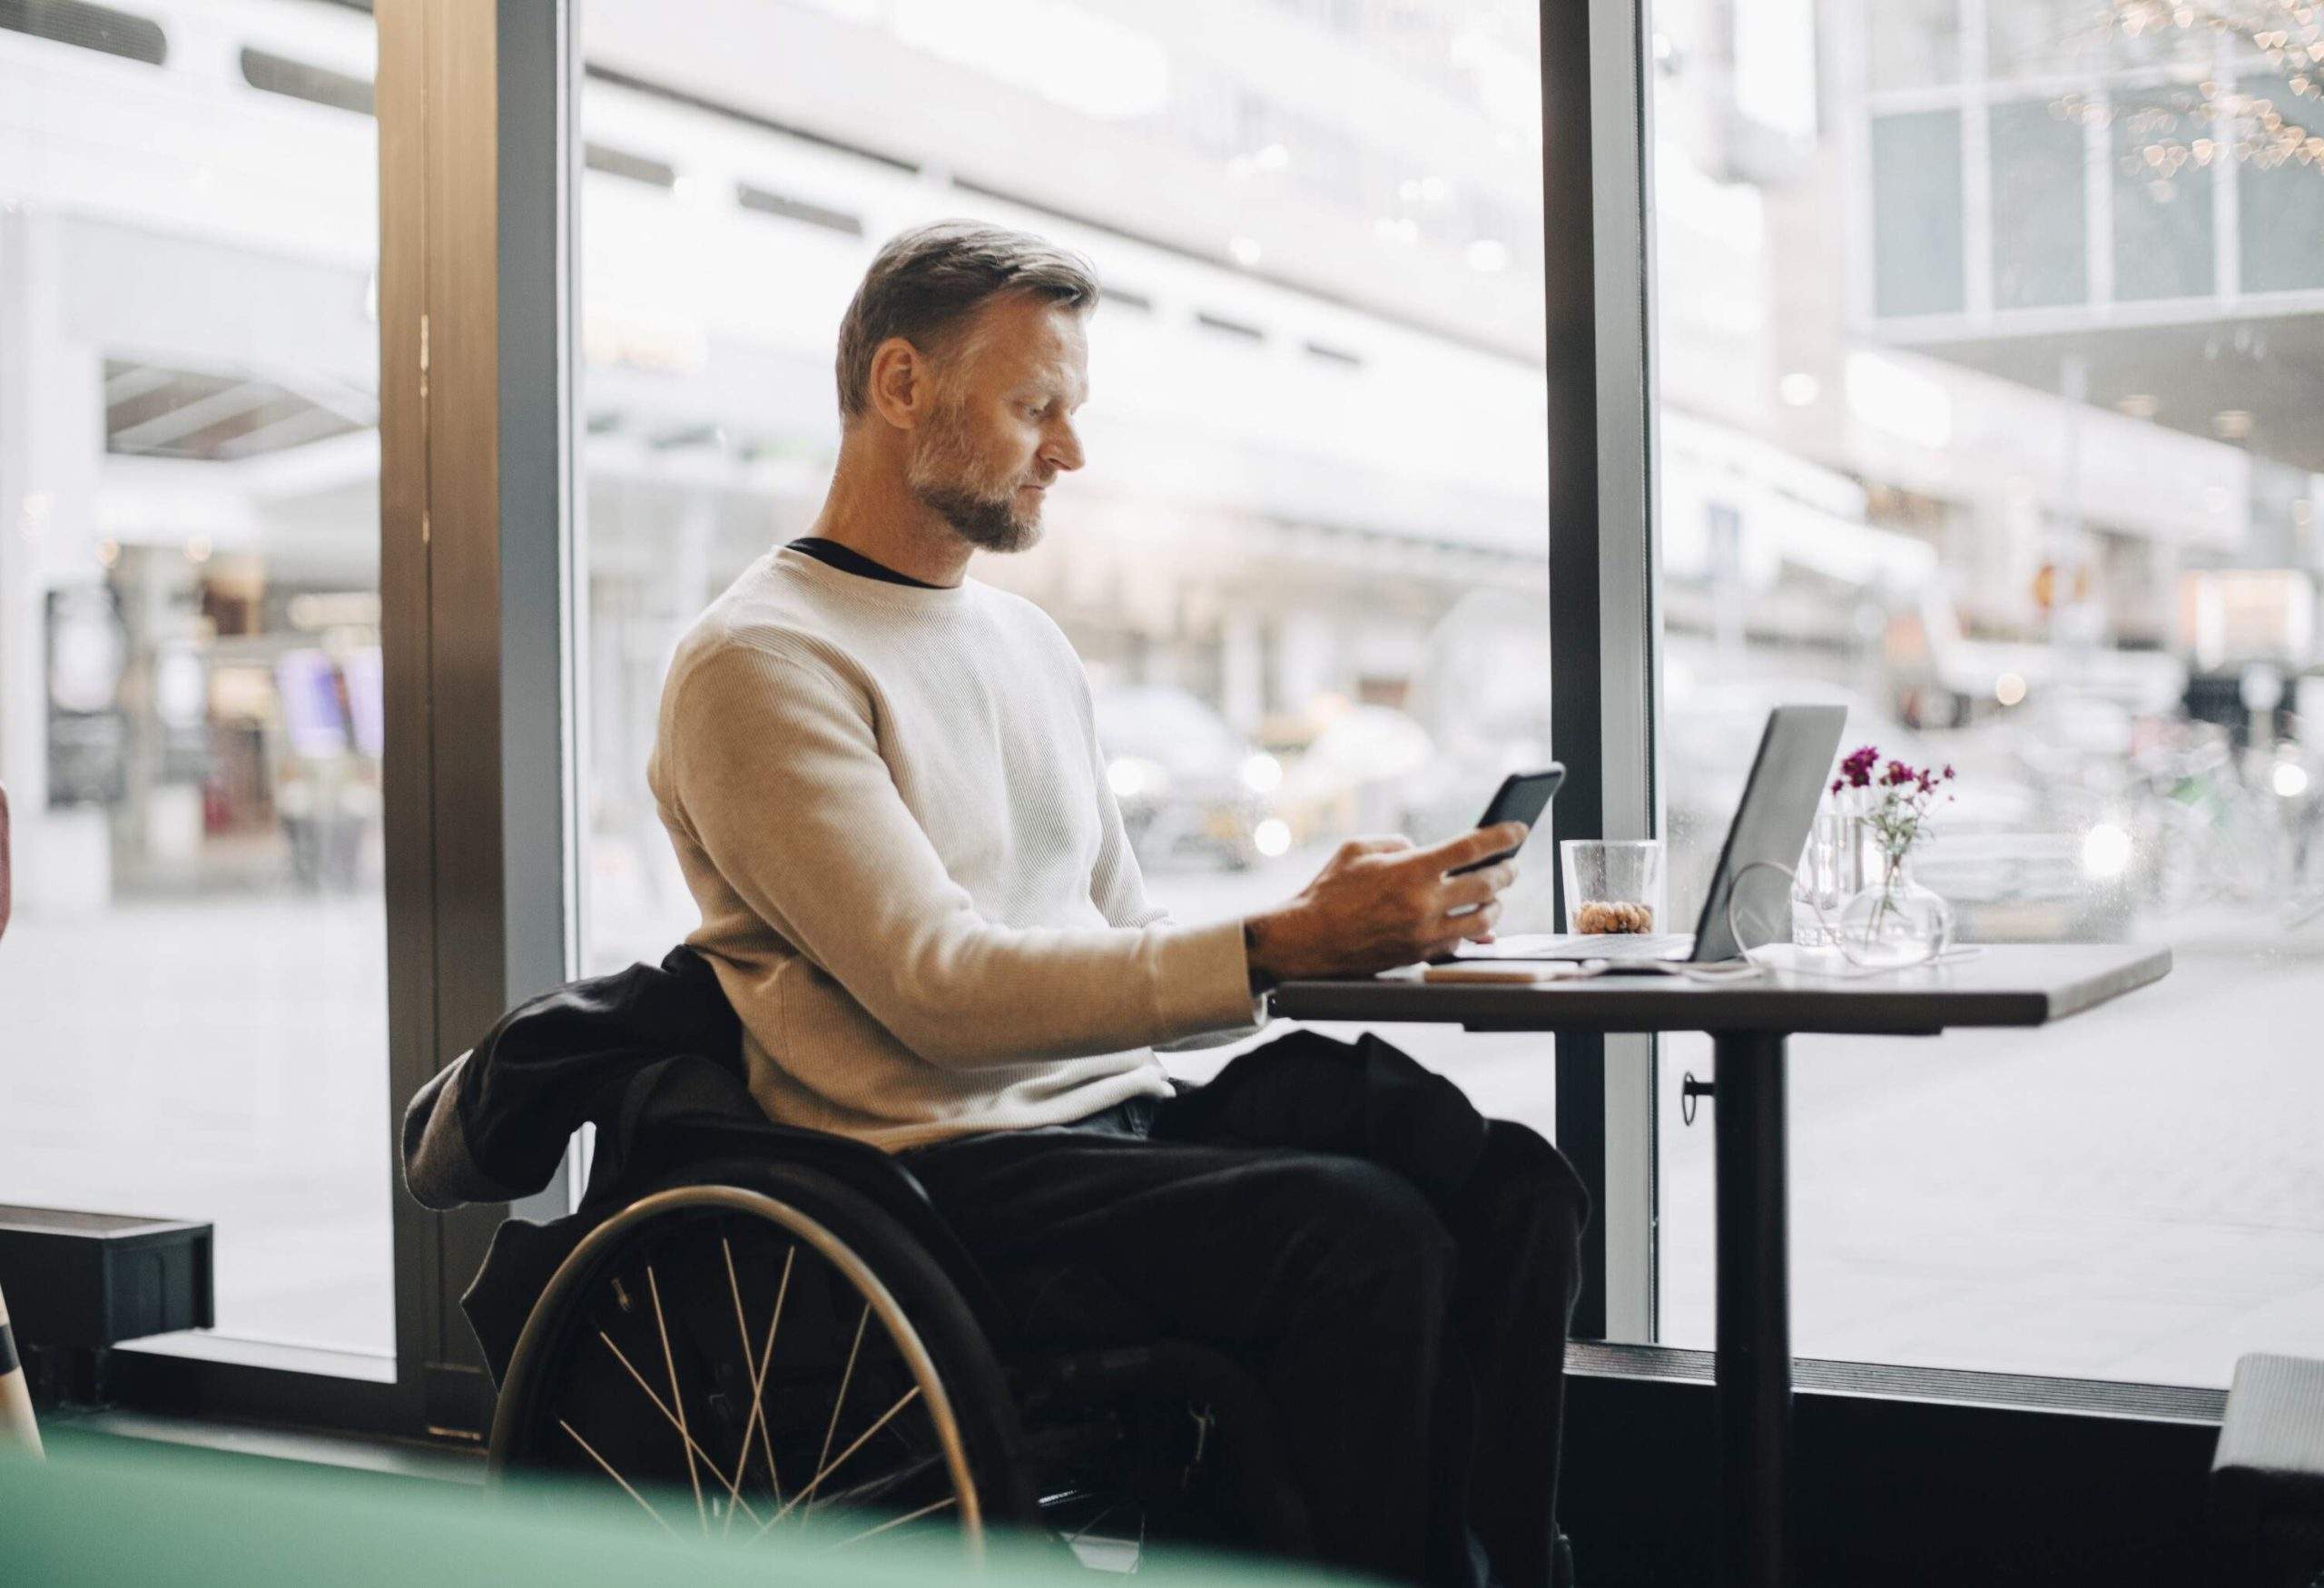 theme_people_man_wheelchair_hotel_laptop_computer_restaurant_gettyimages-1140447702-scaled